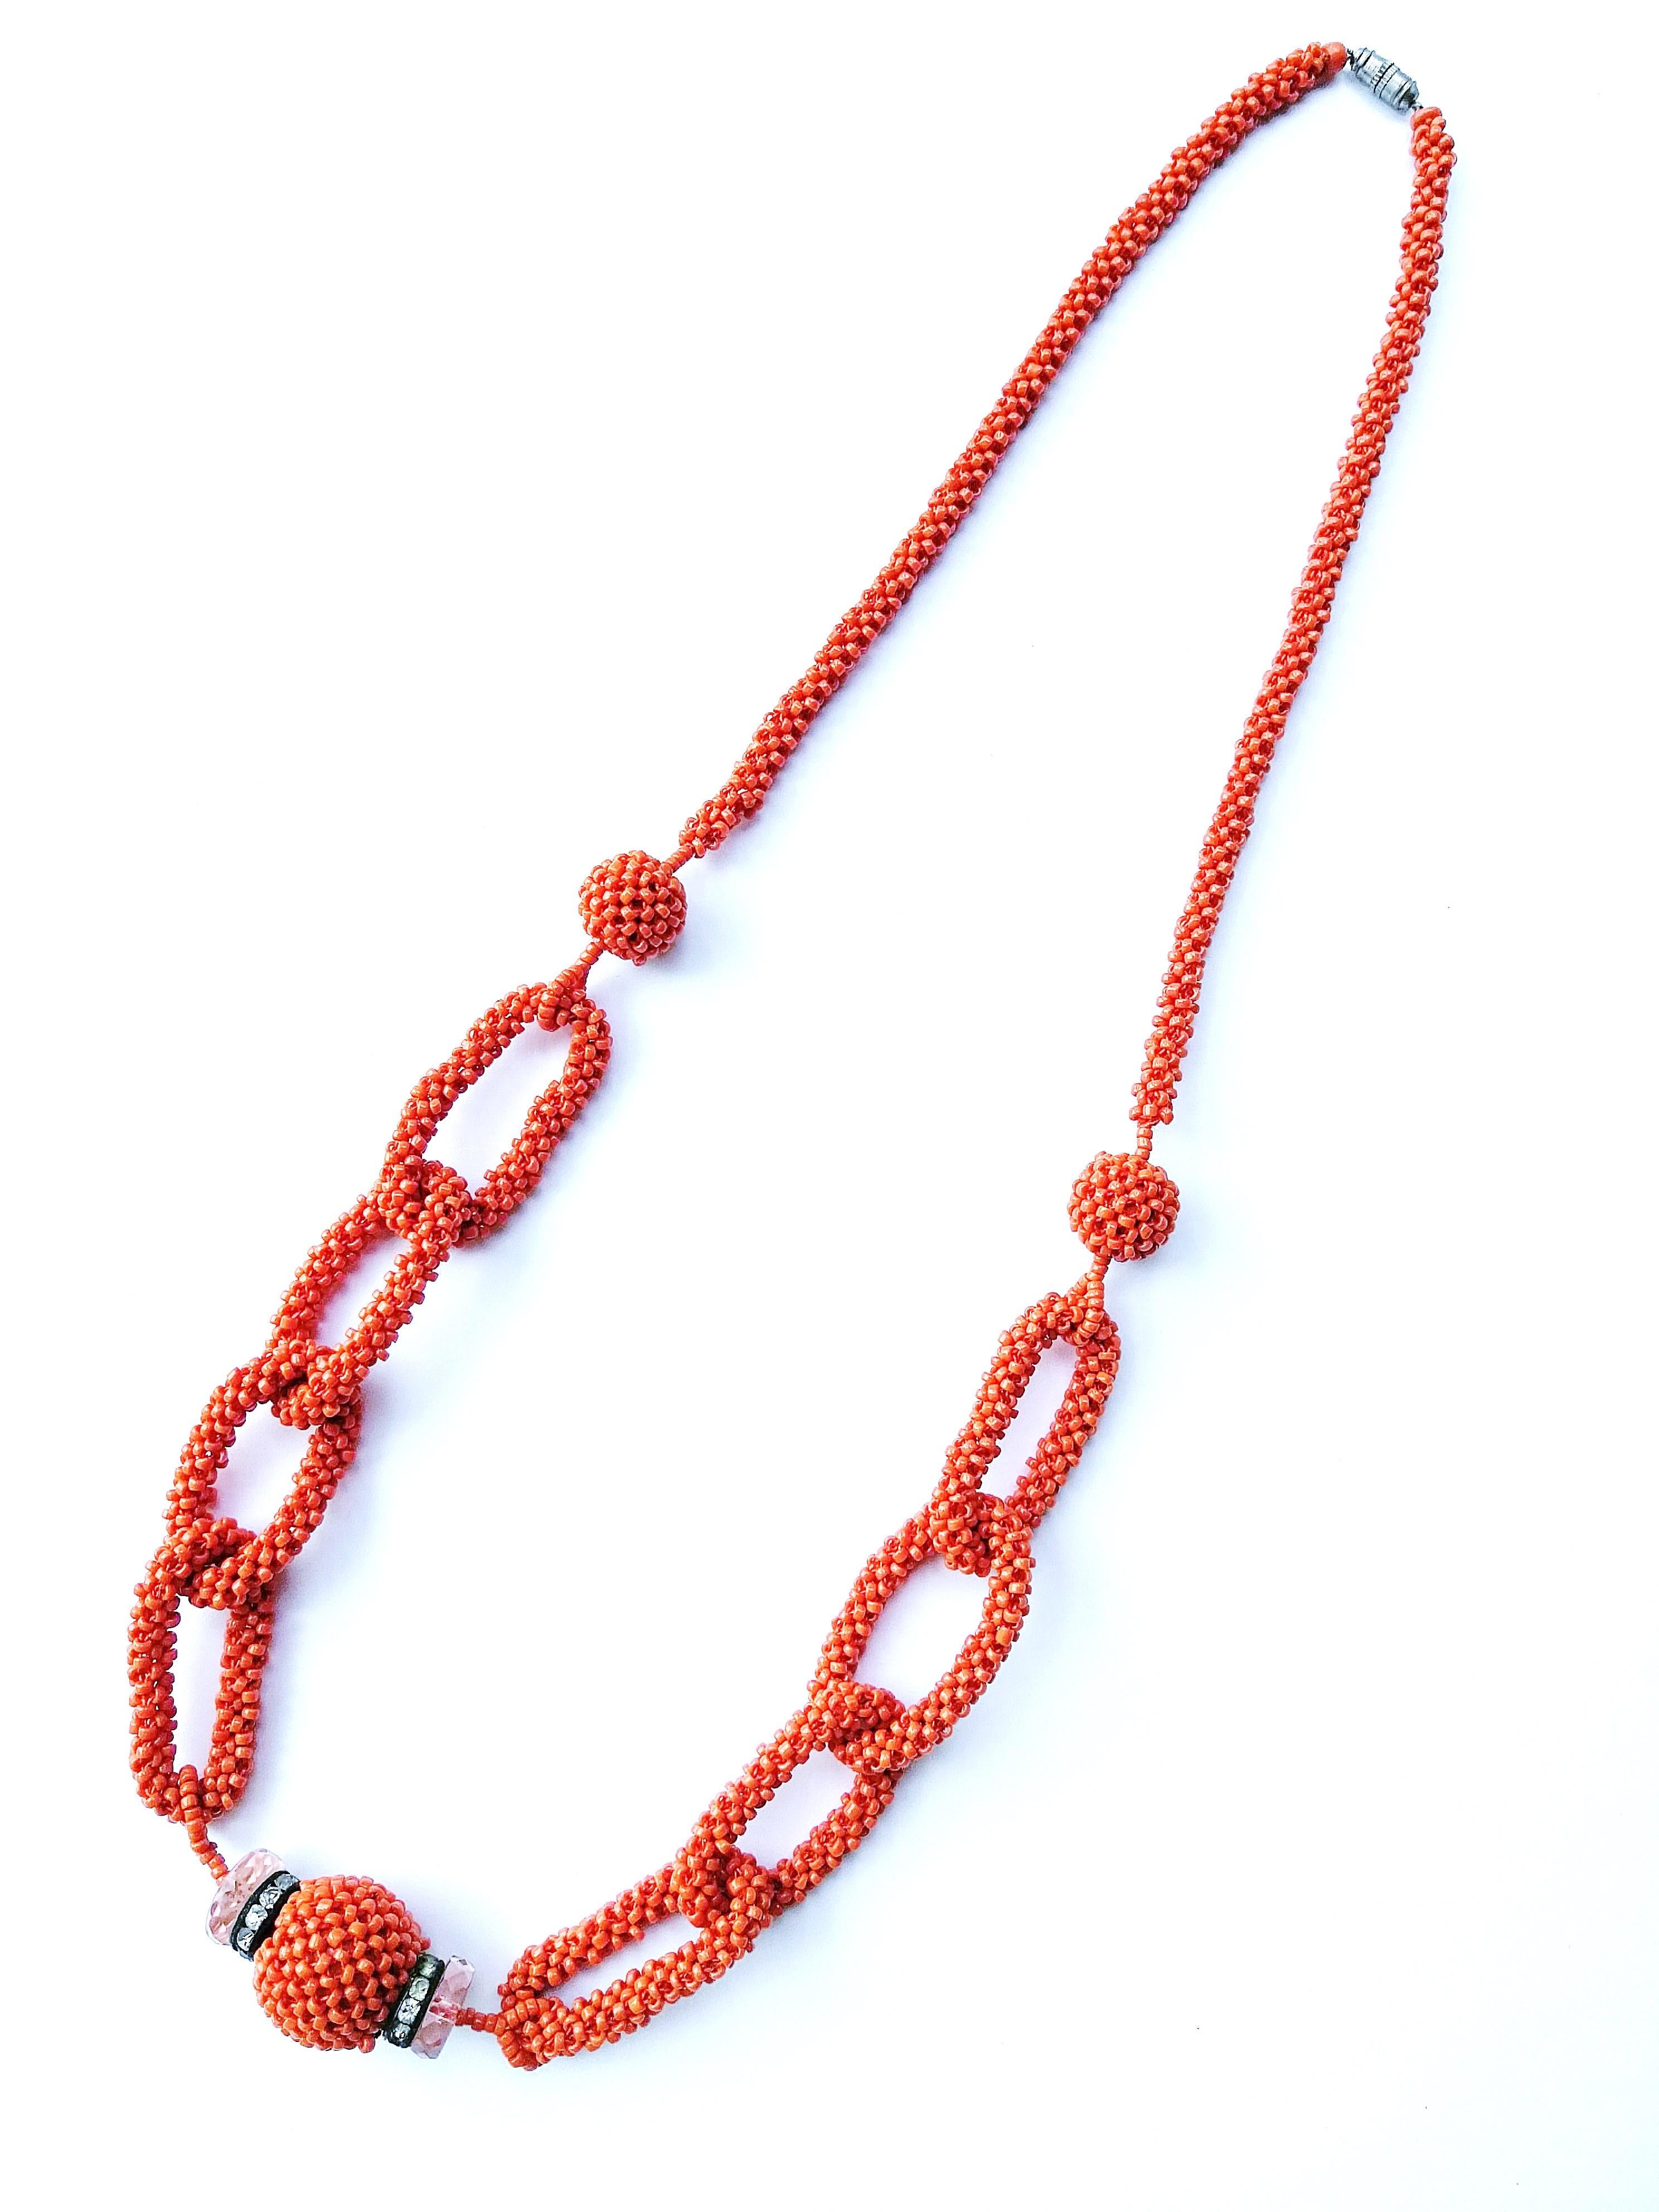 Micro beads of the most glorious colour of deep coral make up this elegant hand made  necklace, all woven into interlocking 'links', like a chain,or a single row, with a delicious 'coral' beaded ball at the front, capped with two paste rondelles and